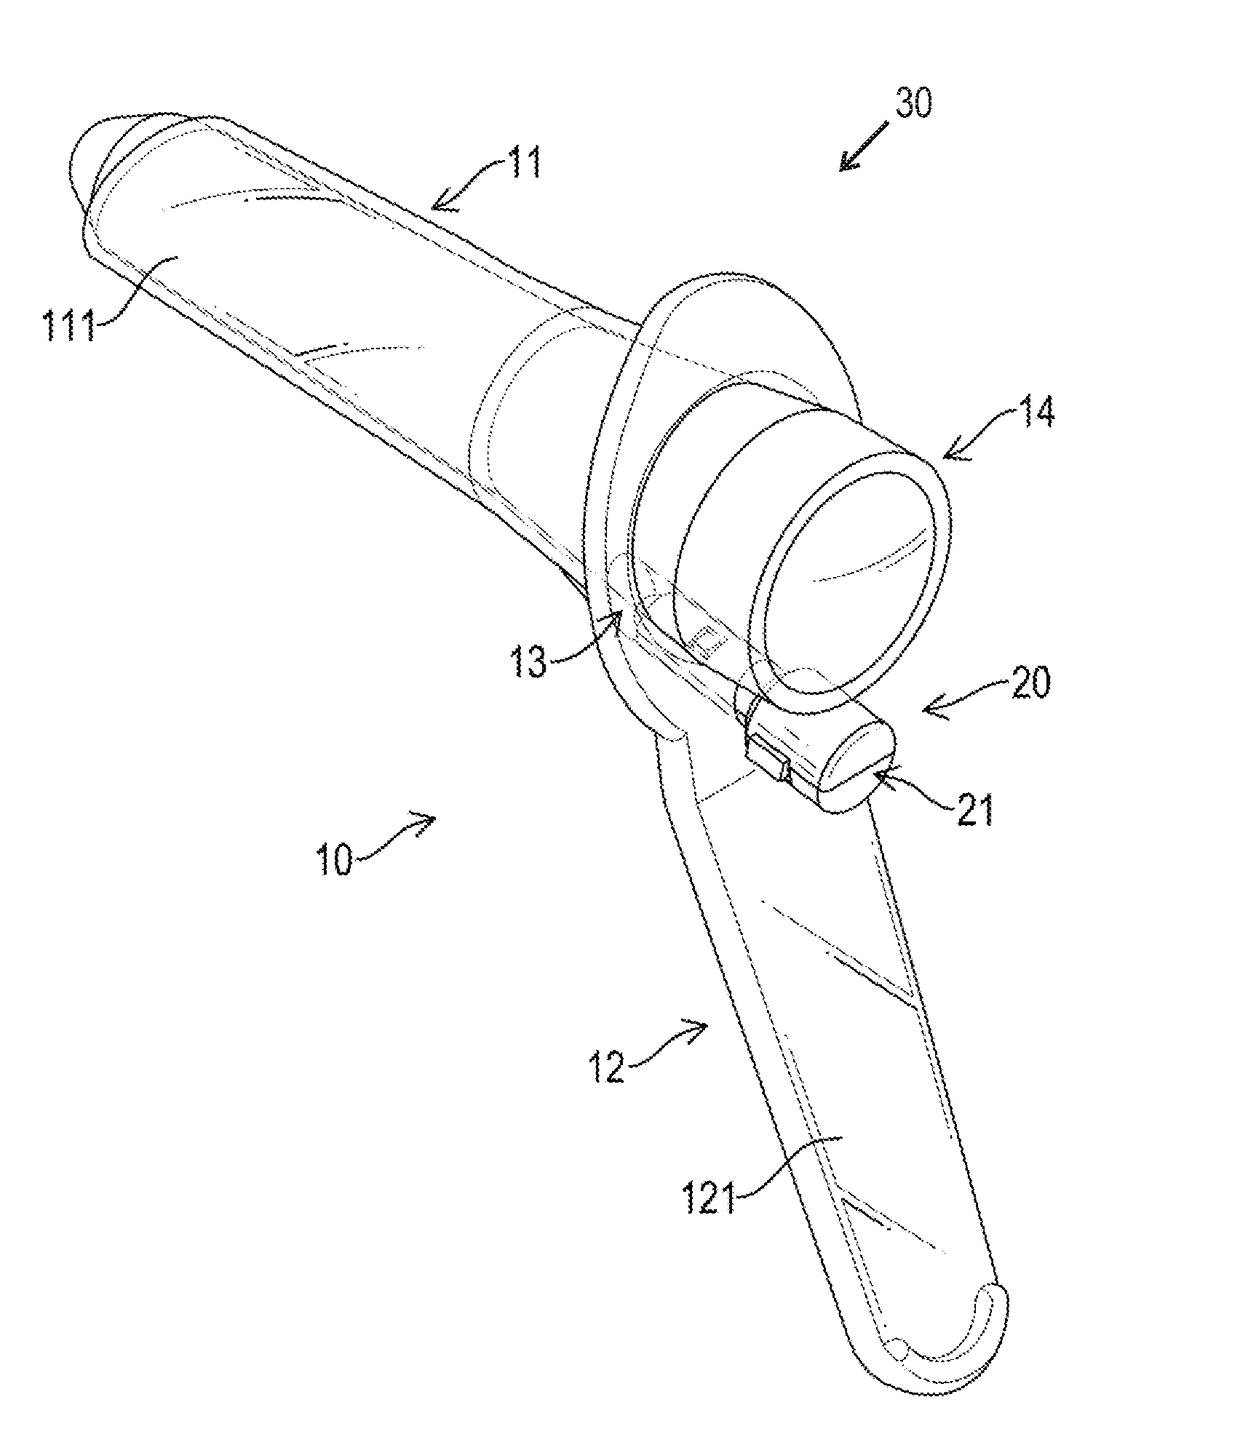 Disposable medical device with a lighting effect